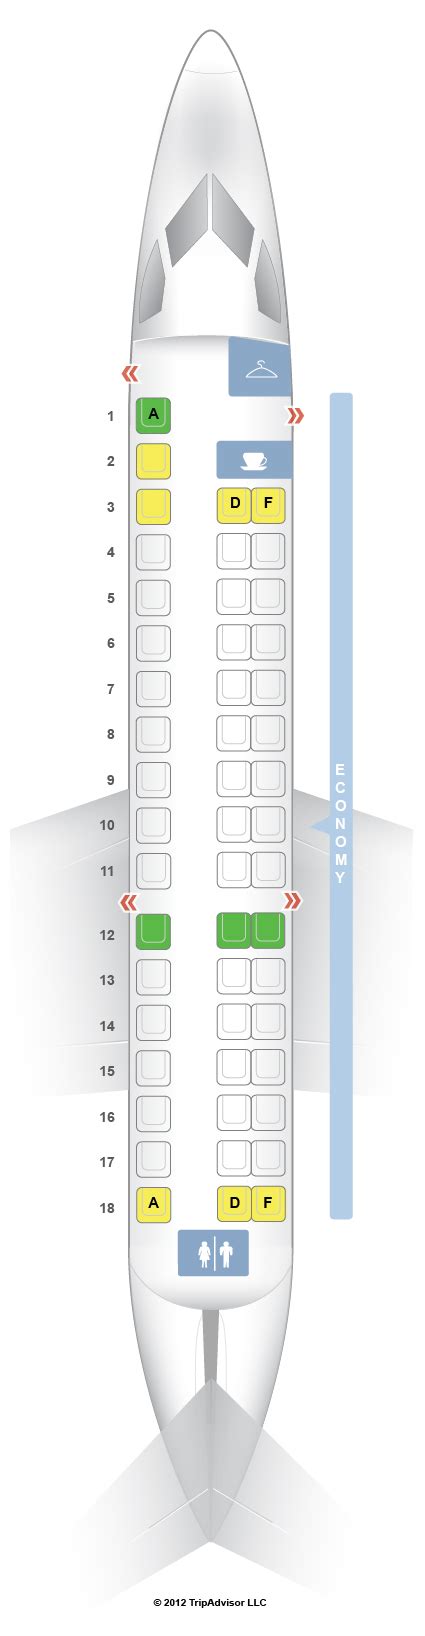 Erj 145 seat map. The Embraer ERJ 145 is an aircraft produced by Embraer for Aero Mongolia and has the following seat configuration: 0-0-0-50. Economy. Seats 50. Pitch 31". Width 17". Recline 3". On the Embraer ERJ 145, Aero Mongolia offers an economy class that's tailored for regional comfort. With 50 seats, the cabin is modern and well-appointed, ensuring a ... 